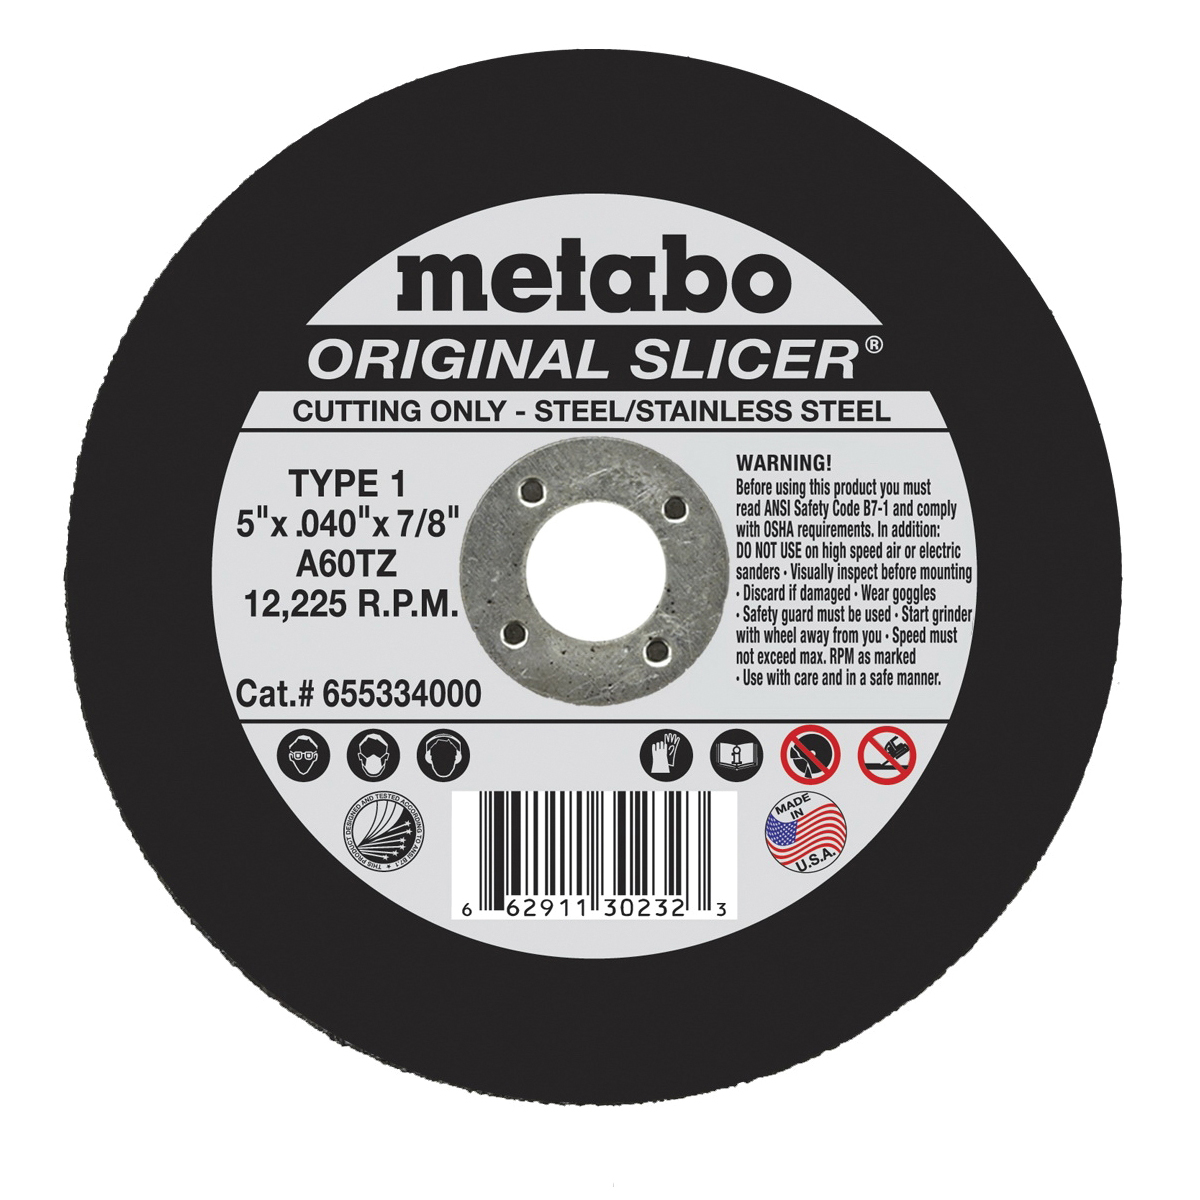 metabo® 655998000 Slicer Plus Cut-Off Wheel, 6 in Dia x 0.045 in THK, 7/8 in Center Hole, 60 Grit, Aluminum Oxide Abrasive